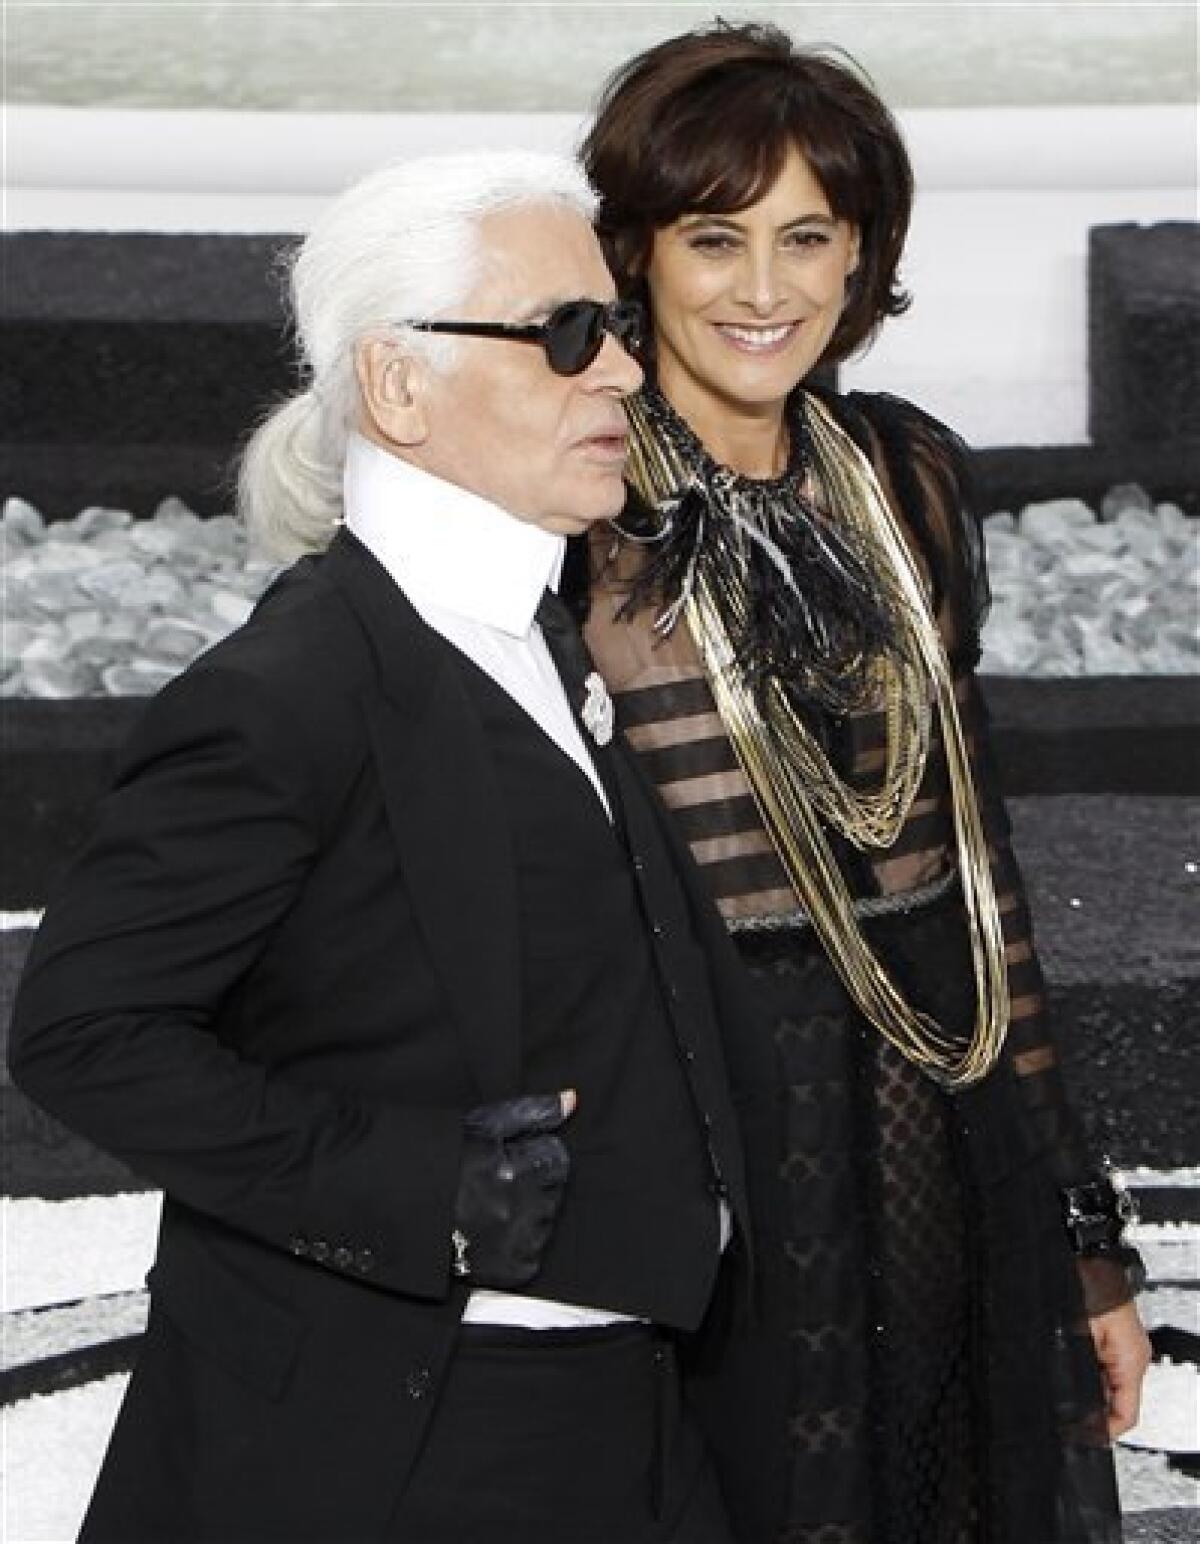 A Look Back At Designer Karl Lagerfeld's Iconic Fashion Career In Photos